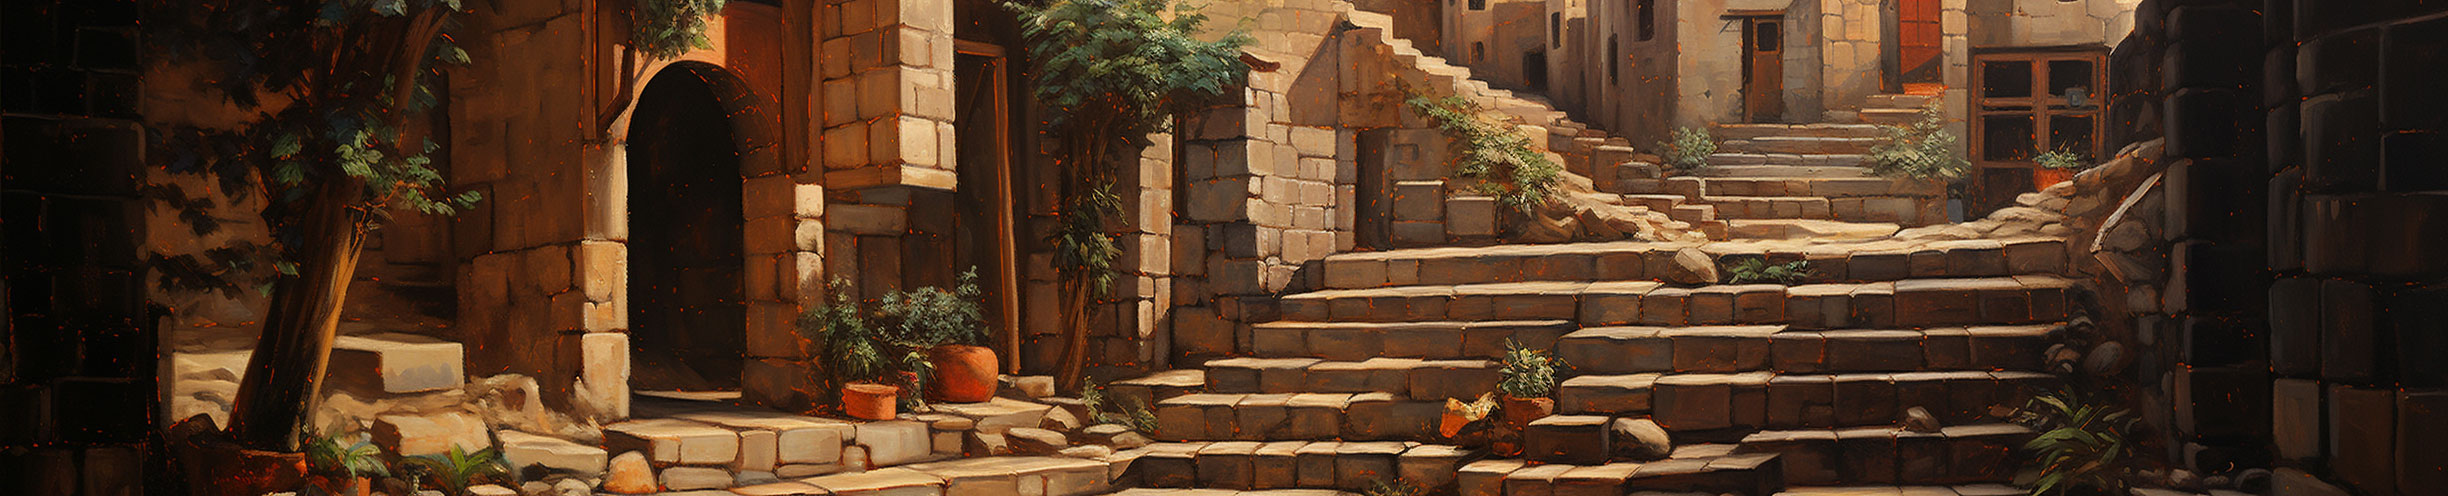 tychodreq_a_finely_detailed_oil_painting_of_a_stone_stairs_lead_adb5ed16-5a8f-4bc9-90b6-6125ba94fb1d.jpg